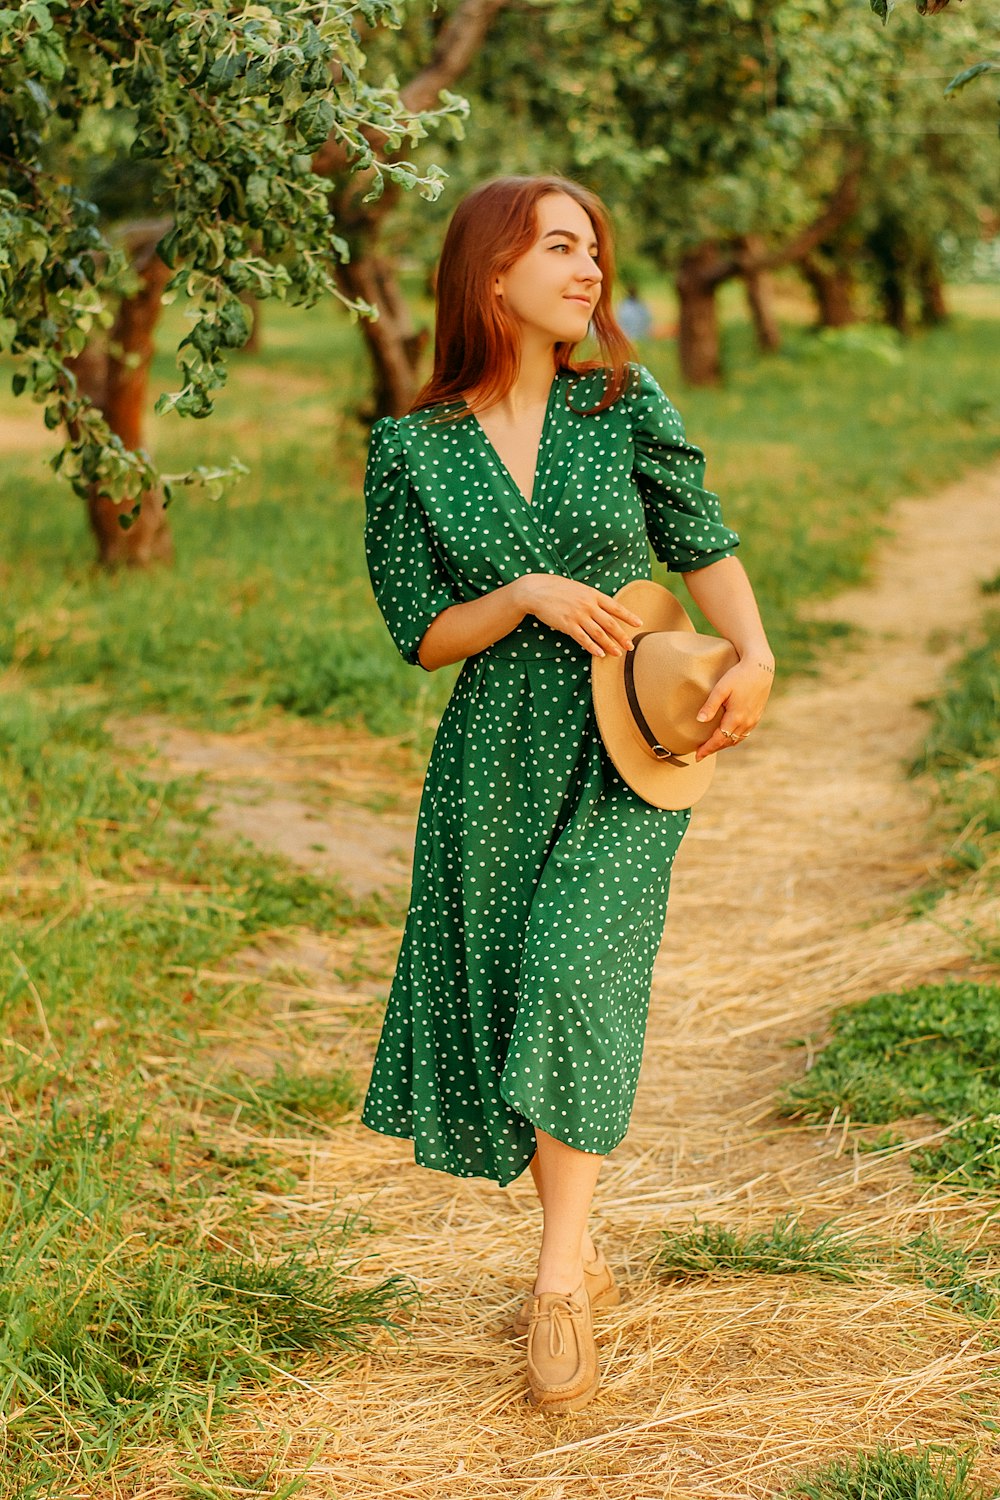 woman in green and black dress holding brown hat standing on brown grass field during daytime